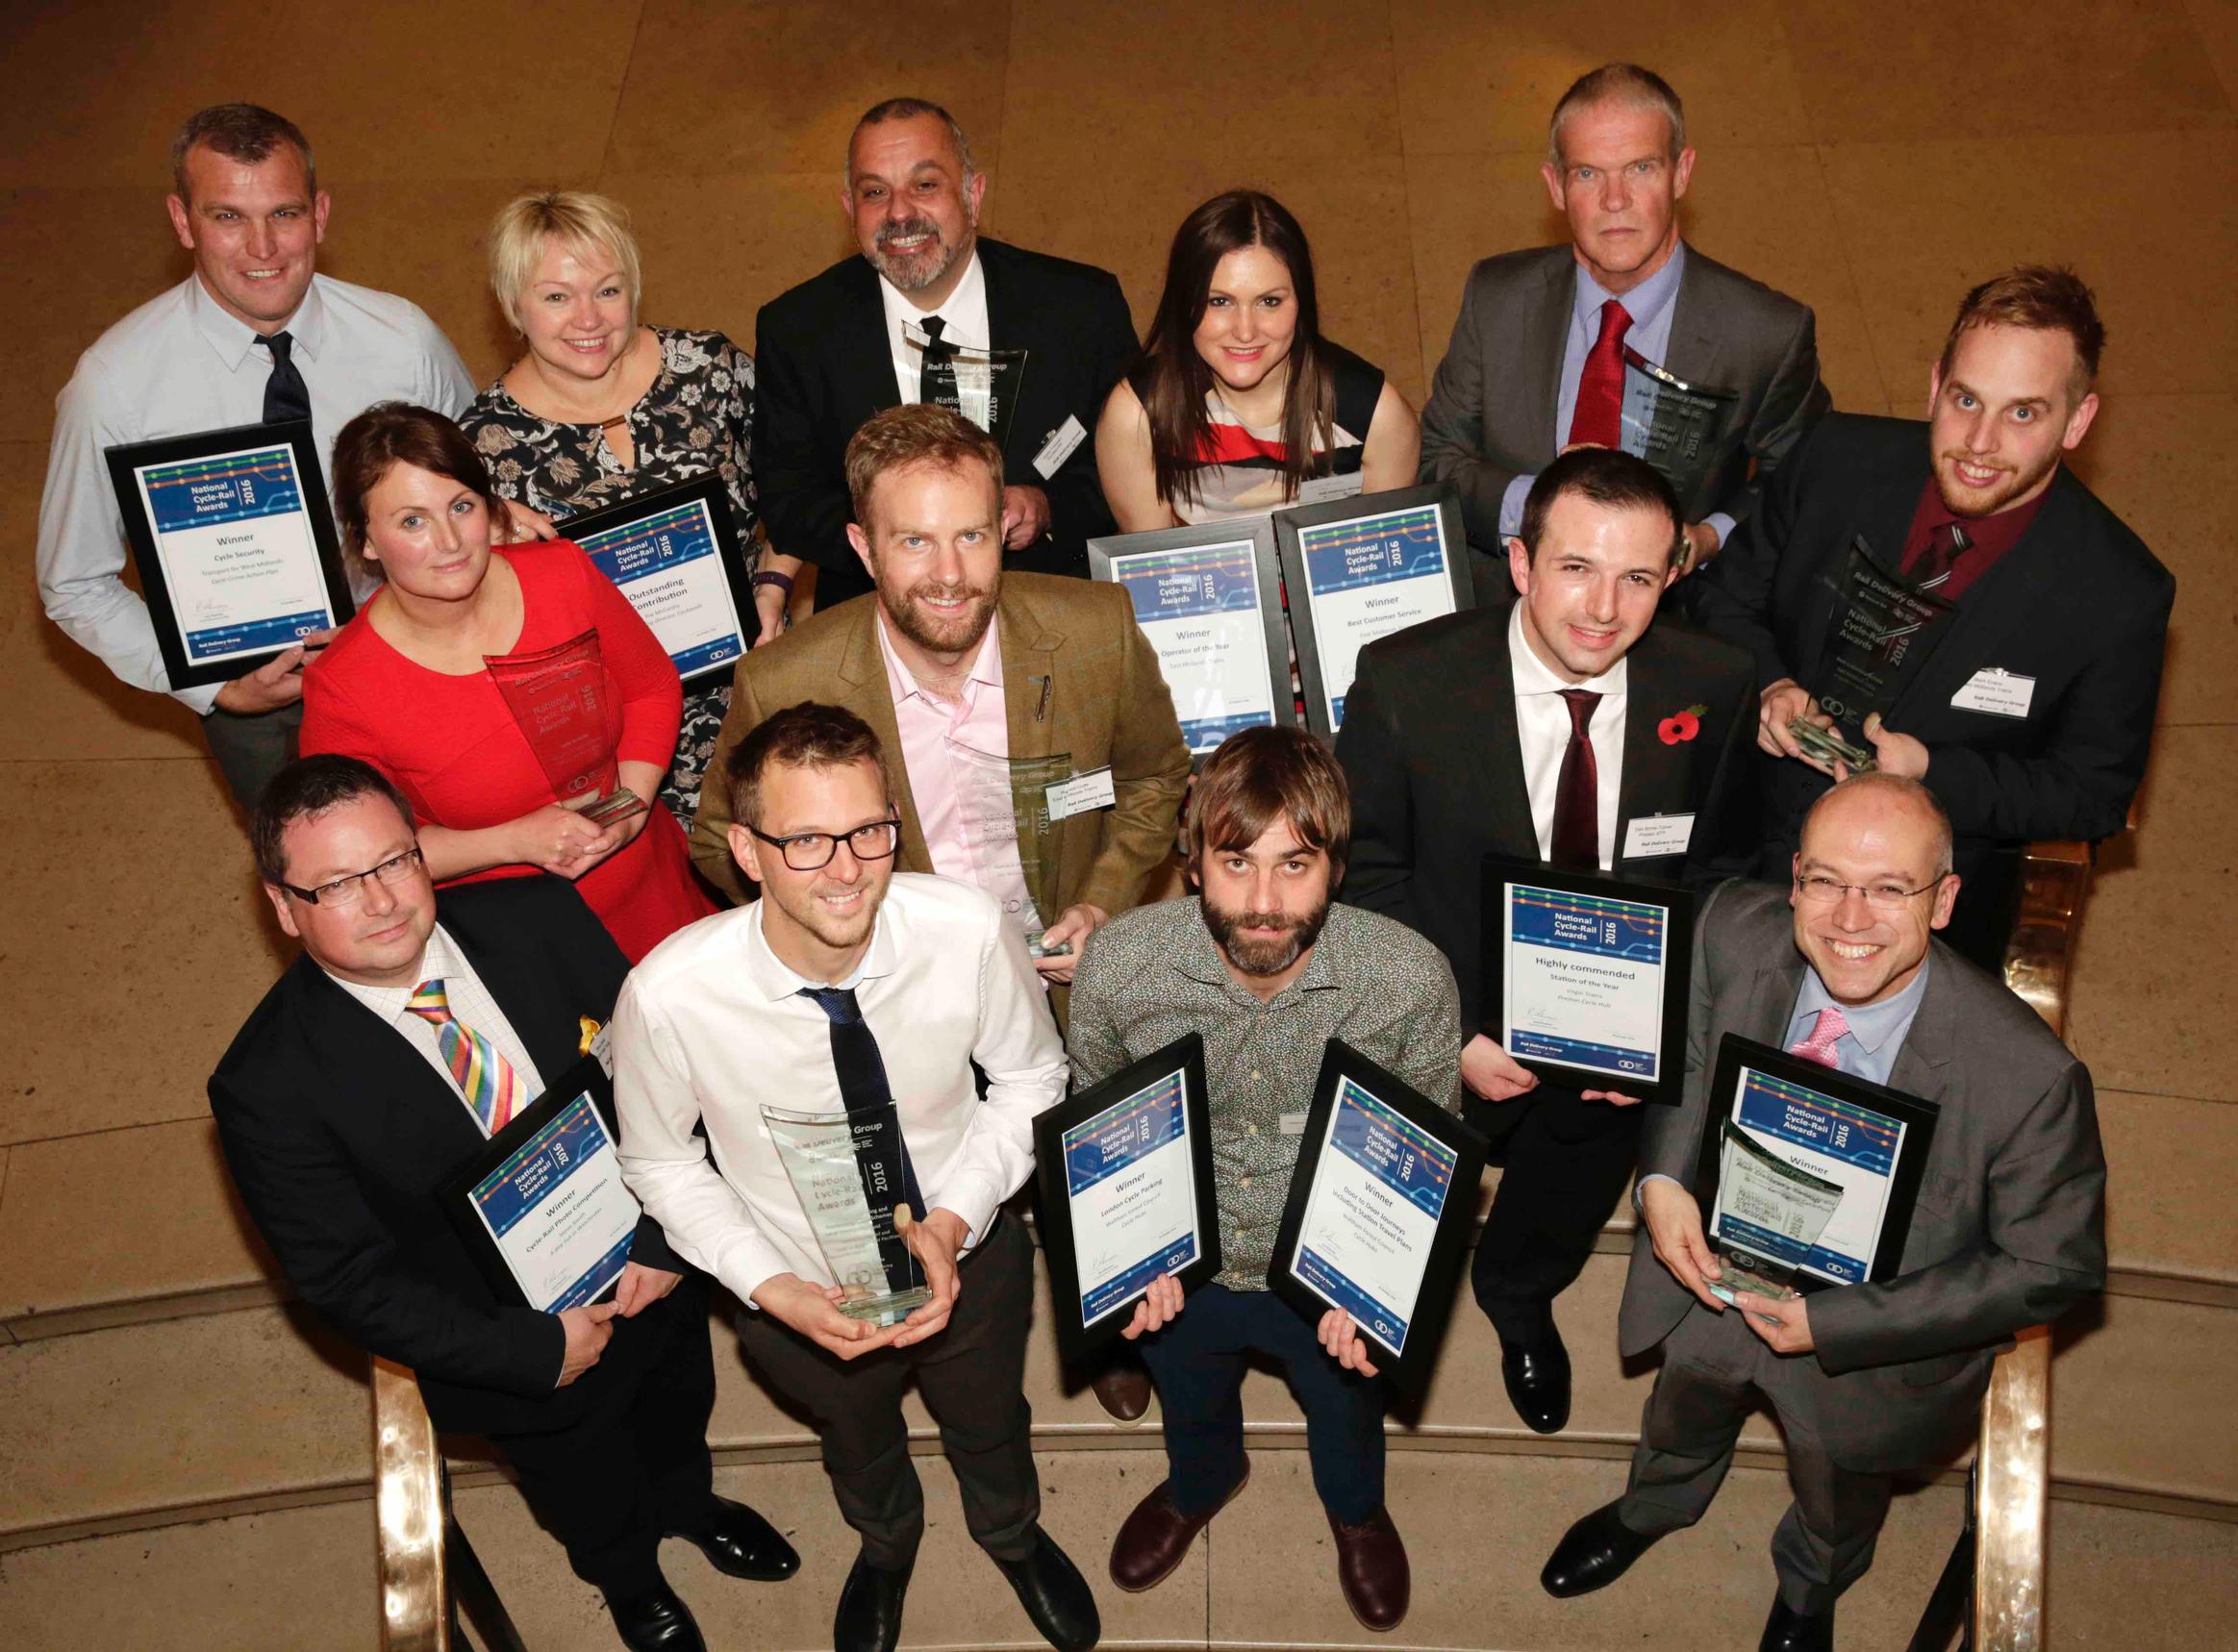 The winners of the National Cycle-Rail Awards 2016